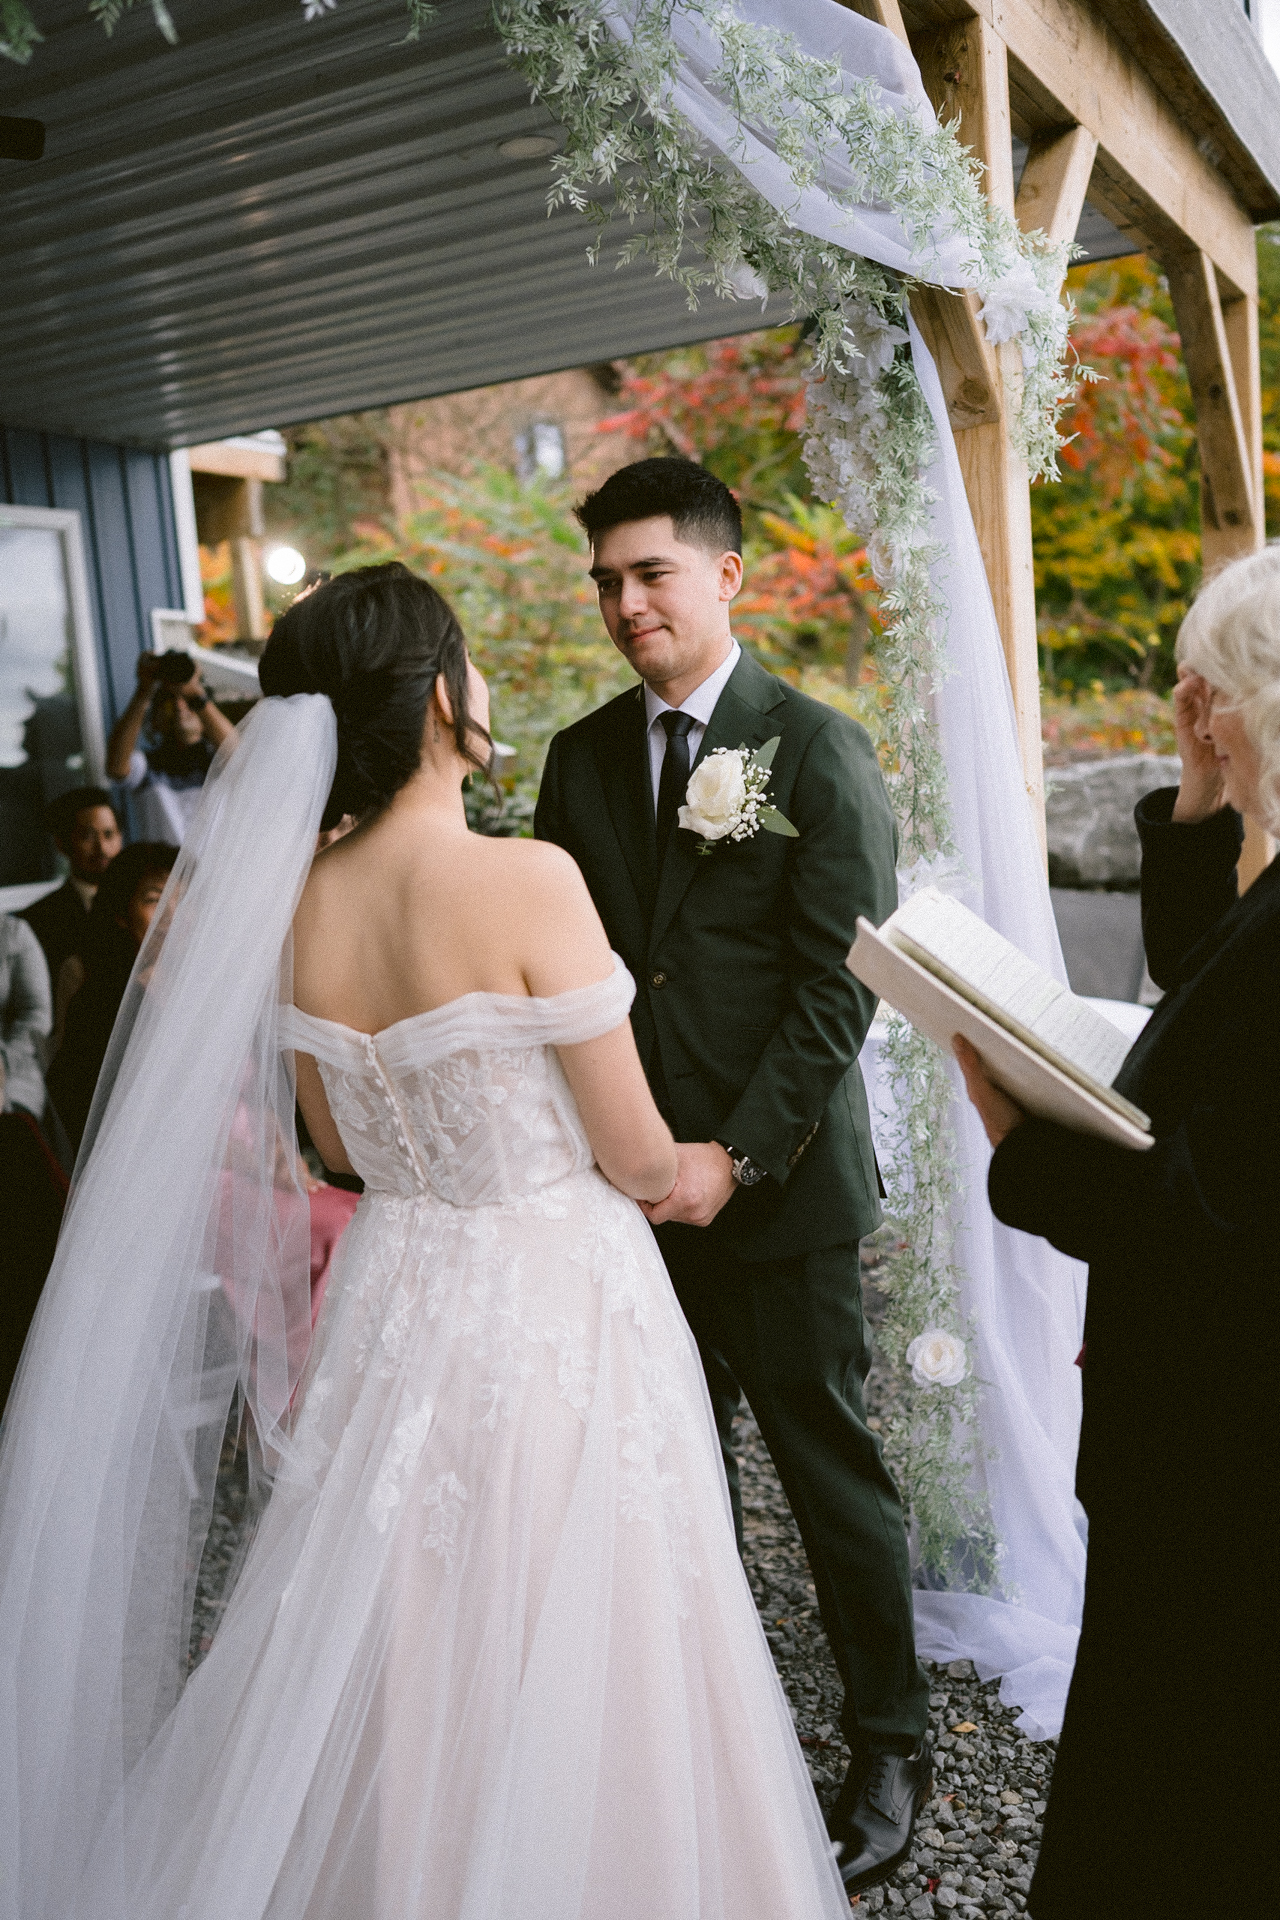 A couple exchanges vows at an outdoor wedding ceremony